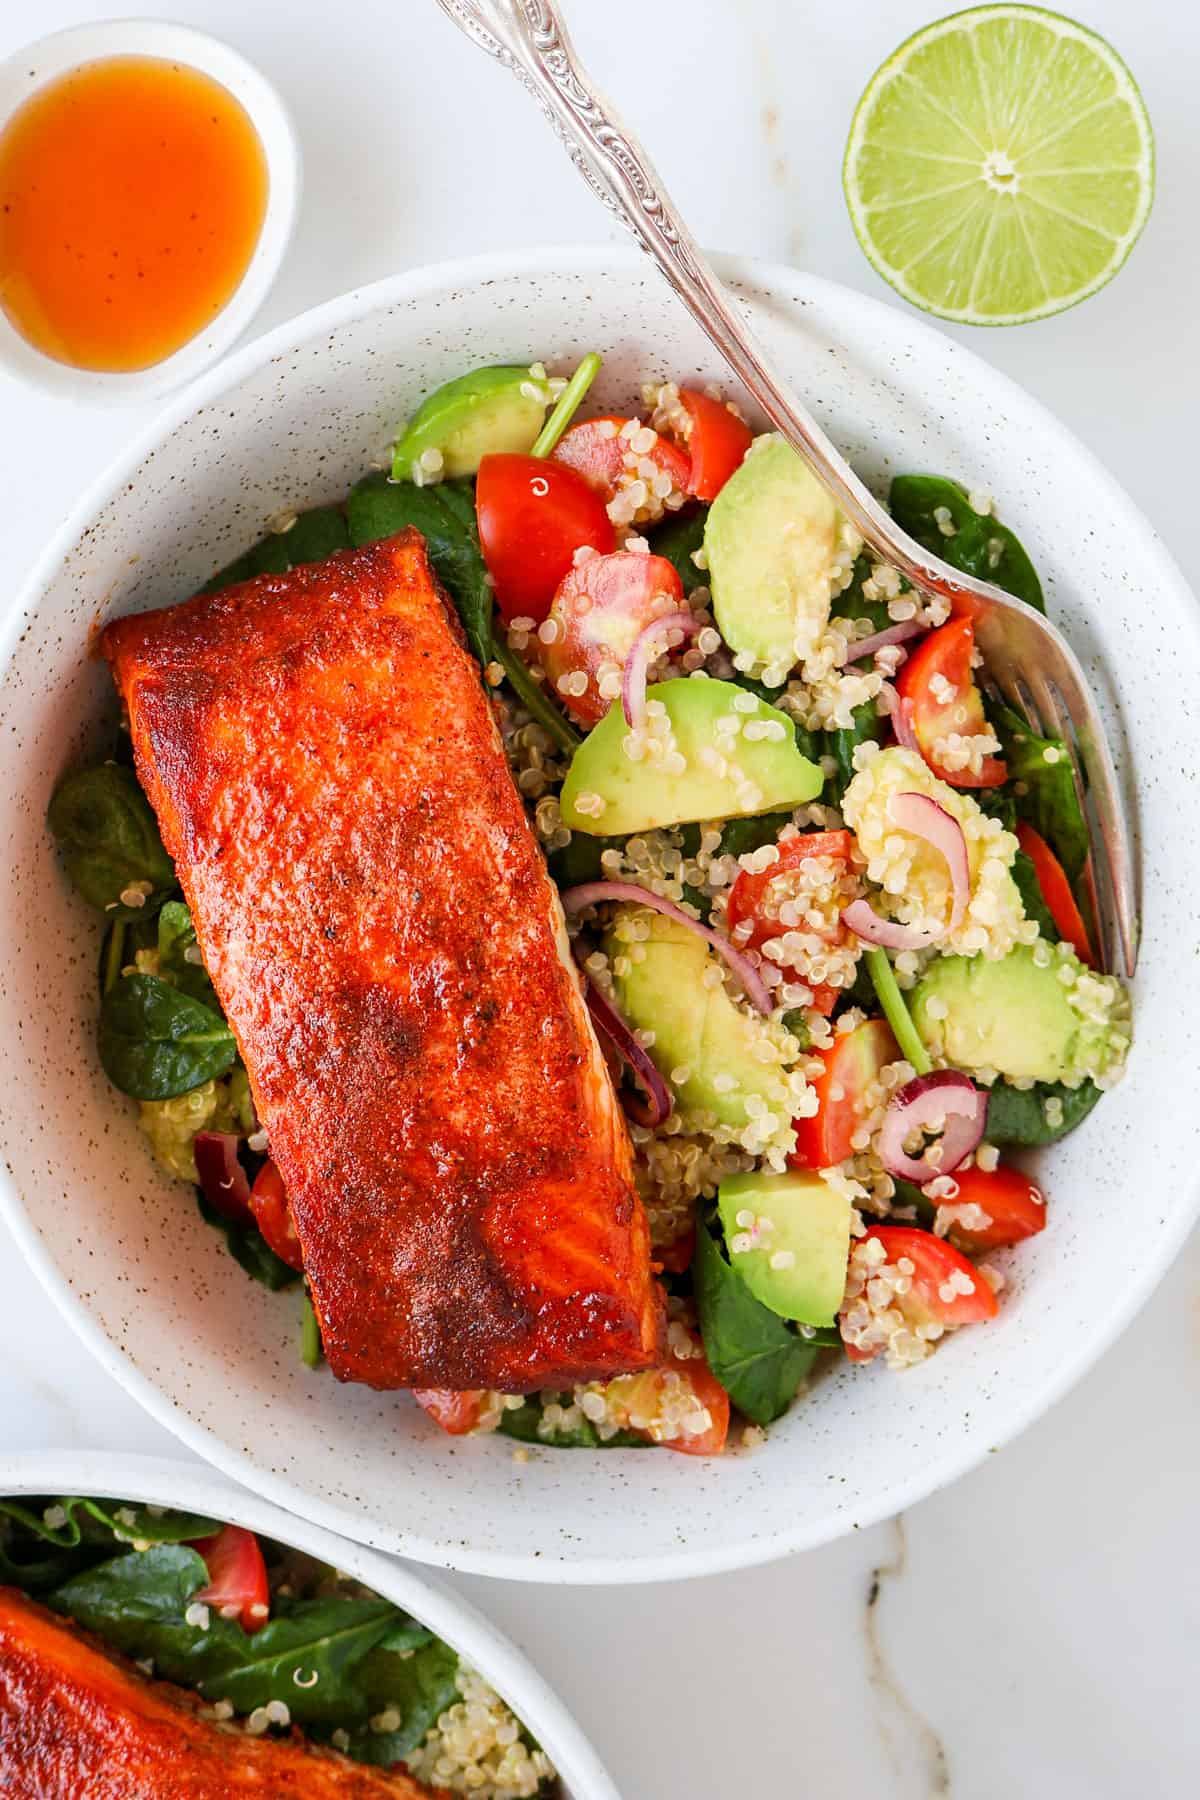 Paprika salmon filet in a bowl with avocado quinoa salad and fork.